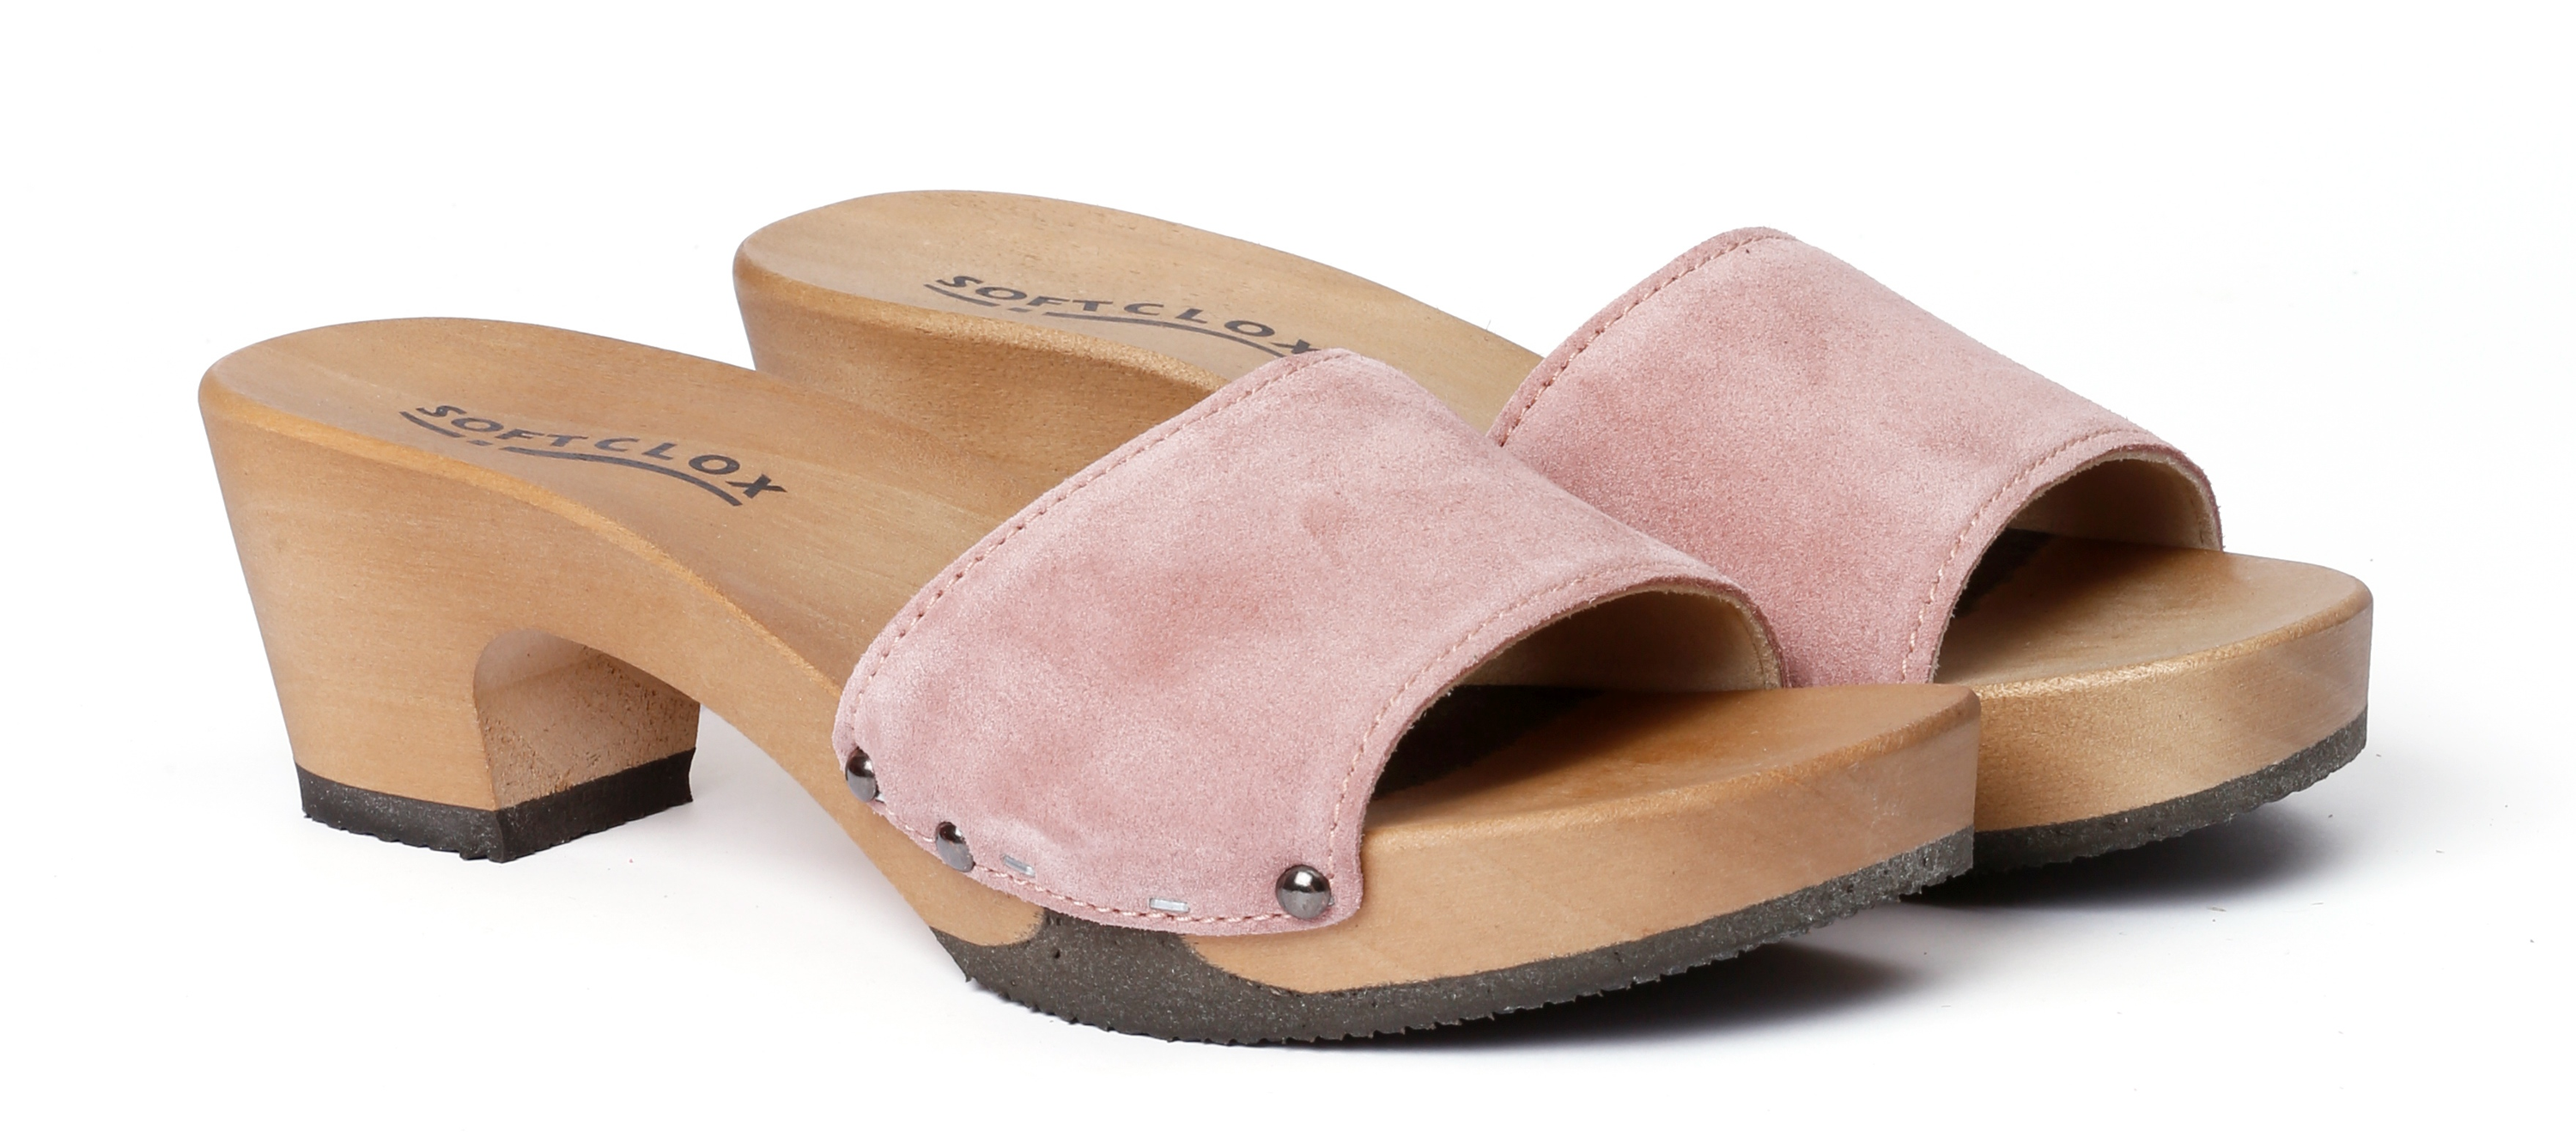 Shoe mule, made from poplar wood with smooth suede  in color rose by Softclox